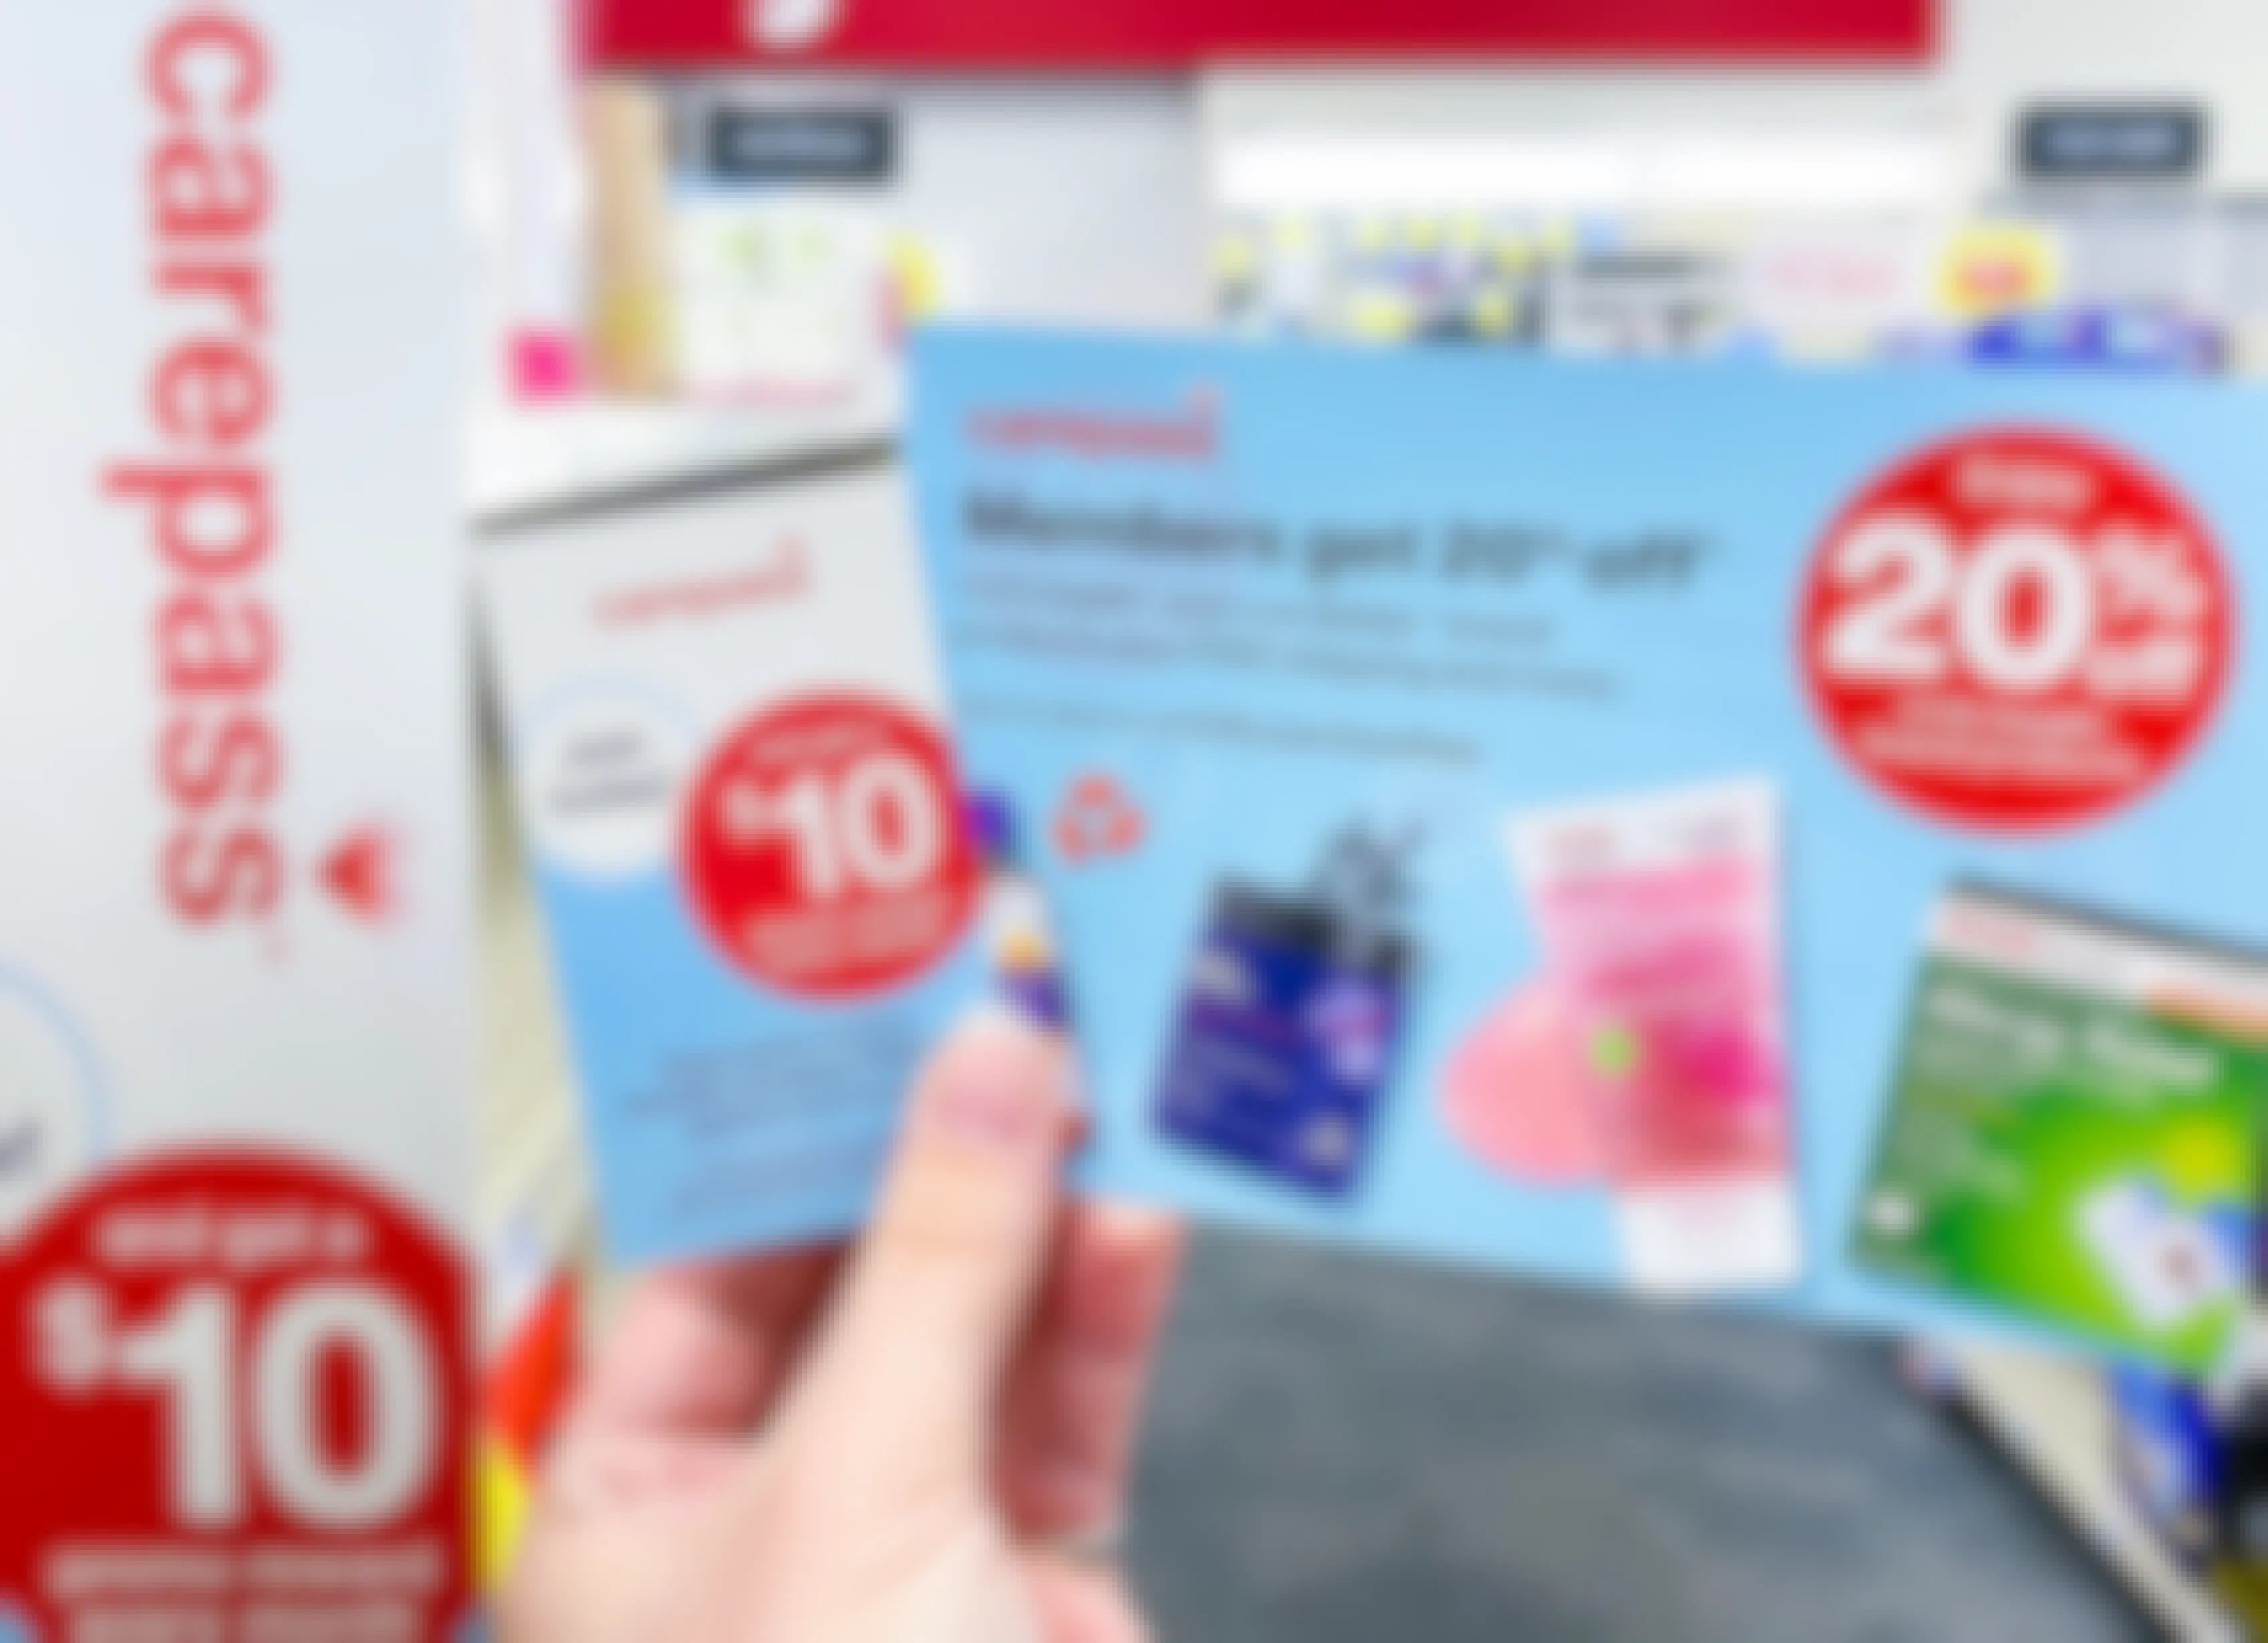 Someone holding some CVS Carepass information cards in a CVS